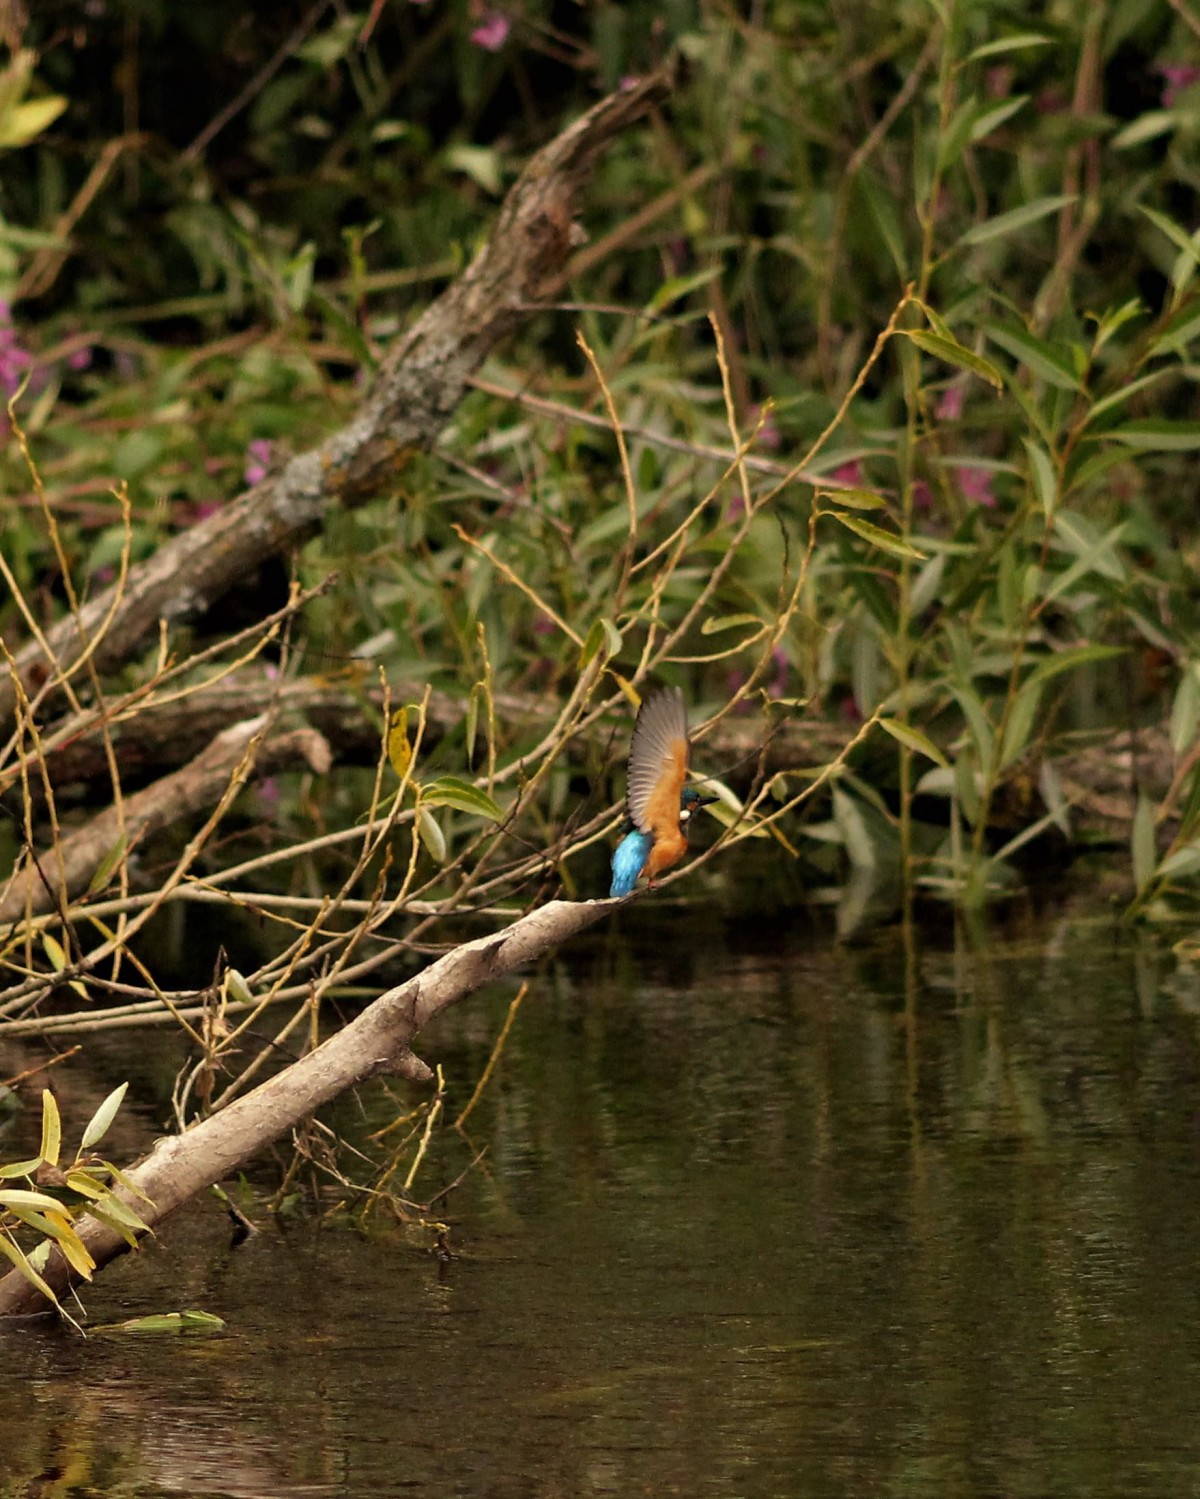 A beautiful Kingfisher by the banks of the River Tay.